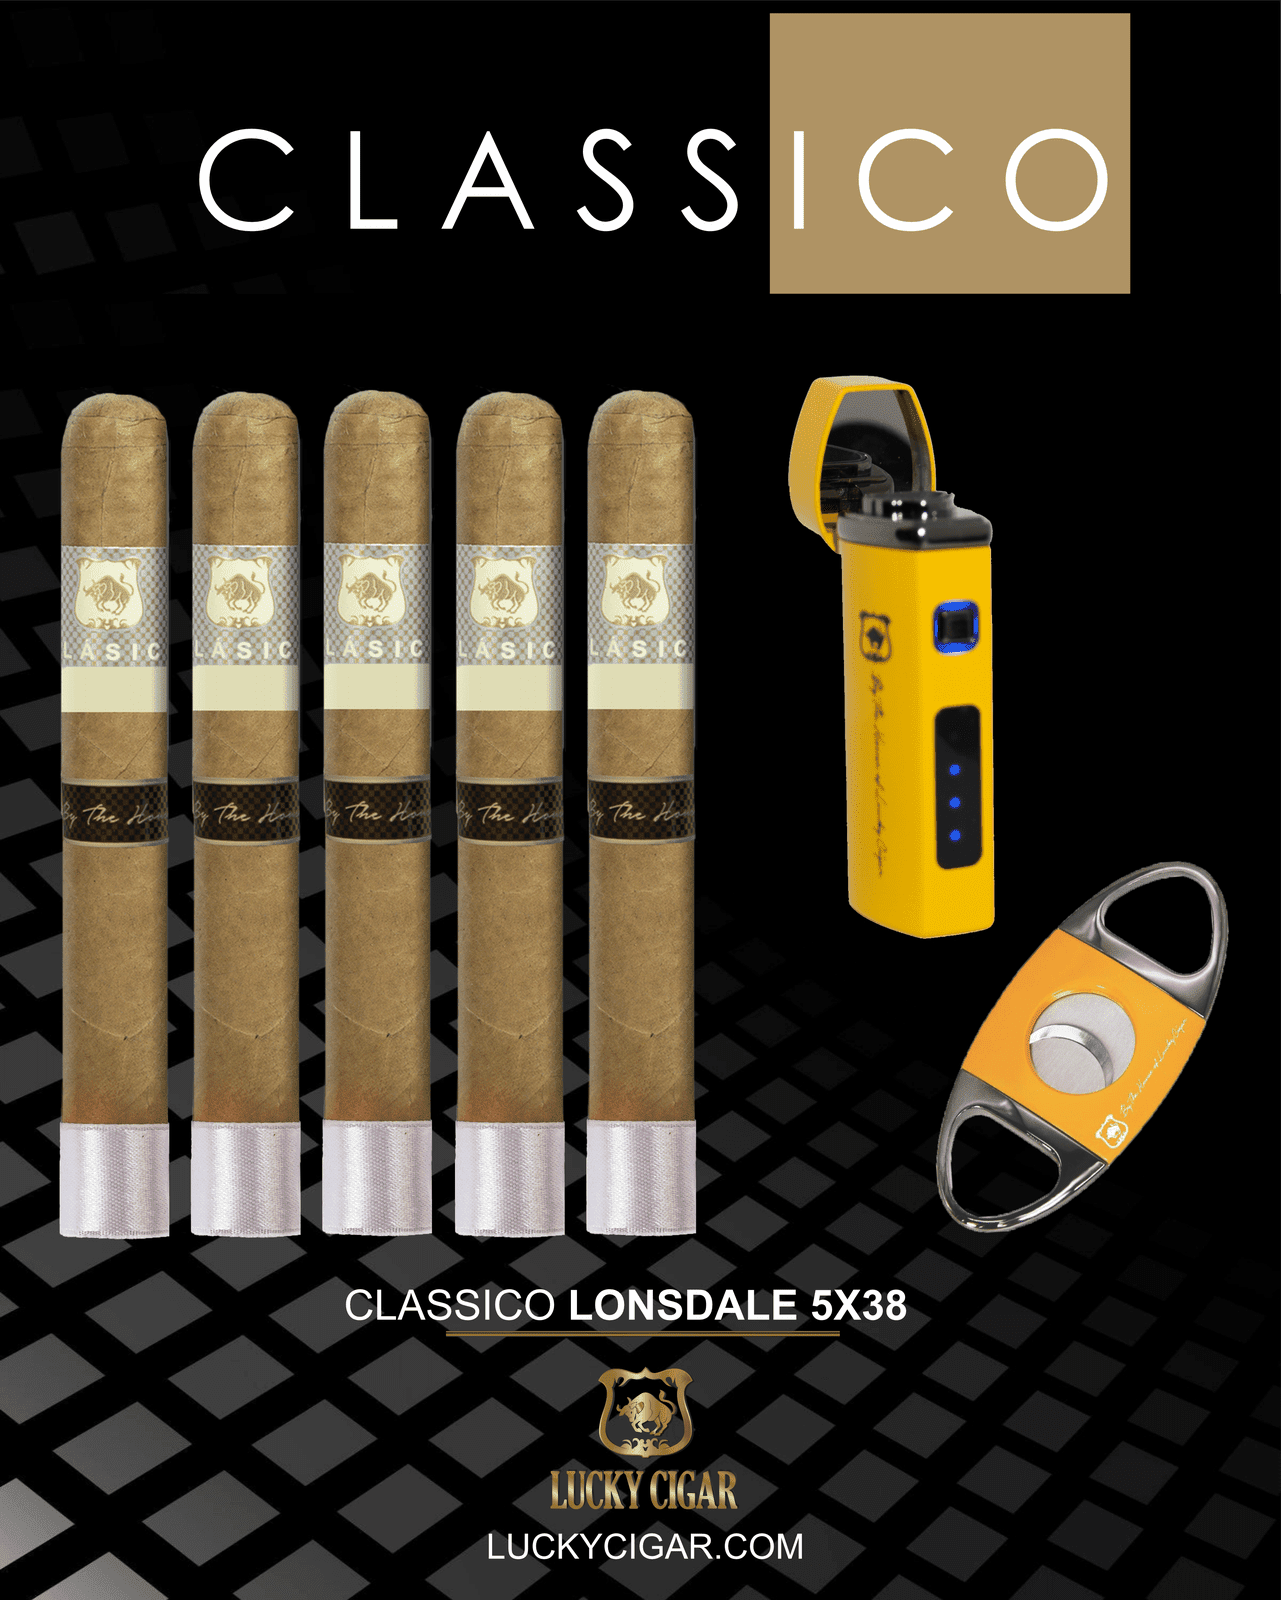 Classic Cigars - Classico by Lucky Cigar: Set of 5 Cigars, 5 Lonsdale with Torch, Cutter